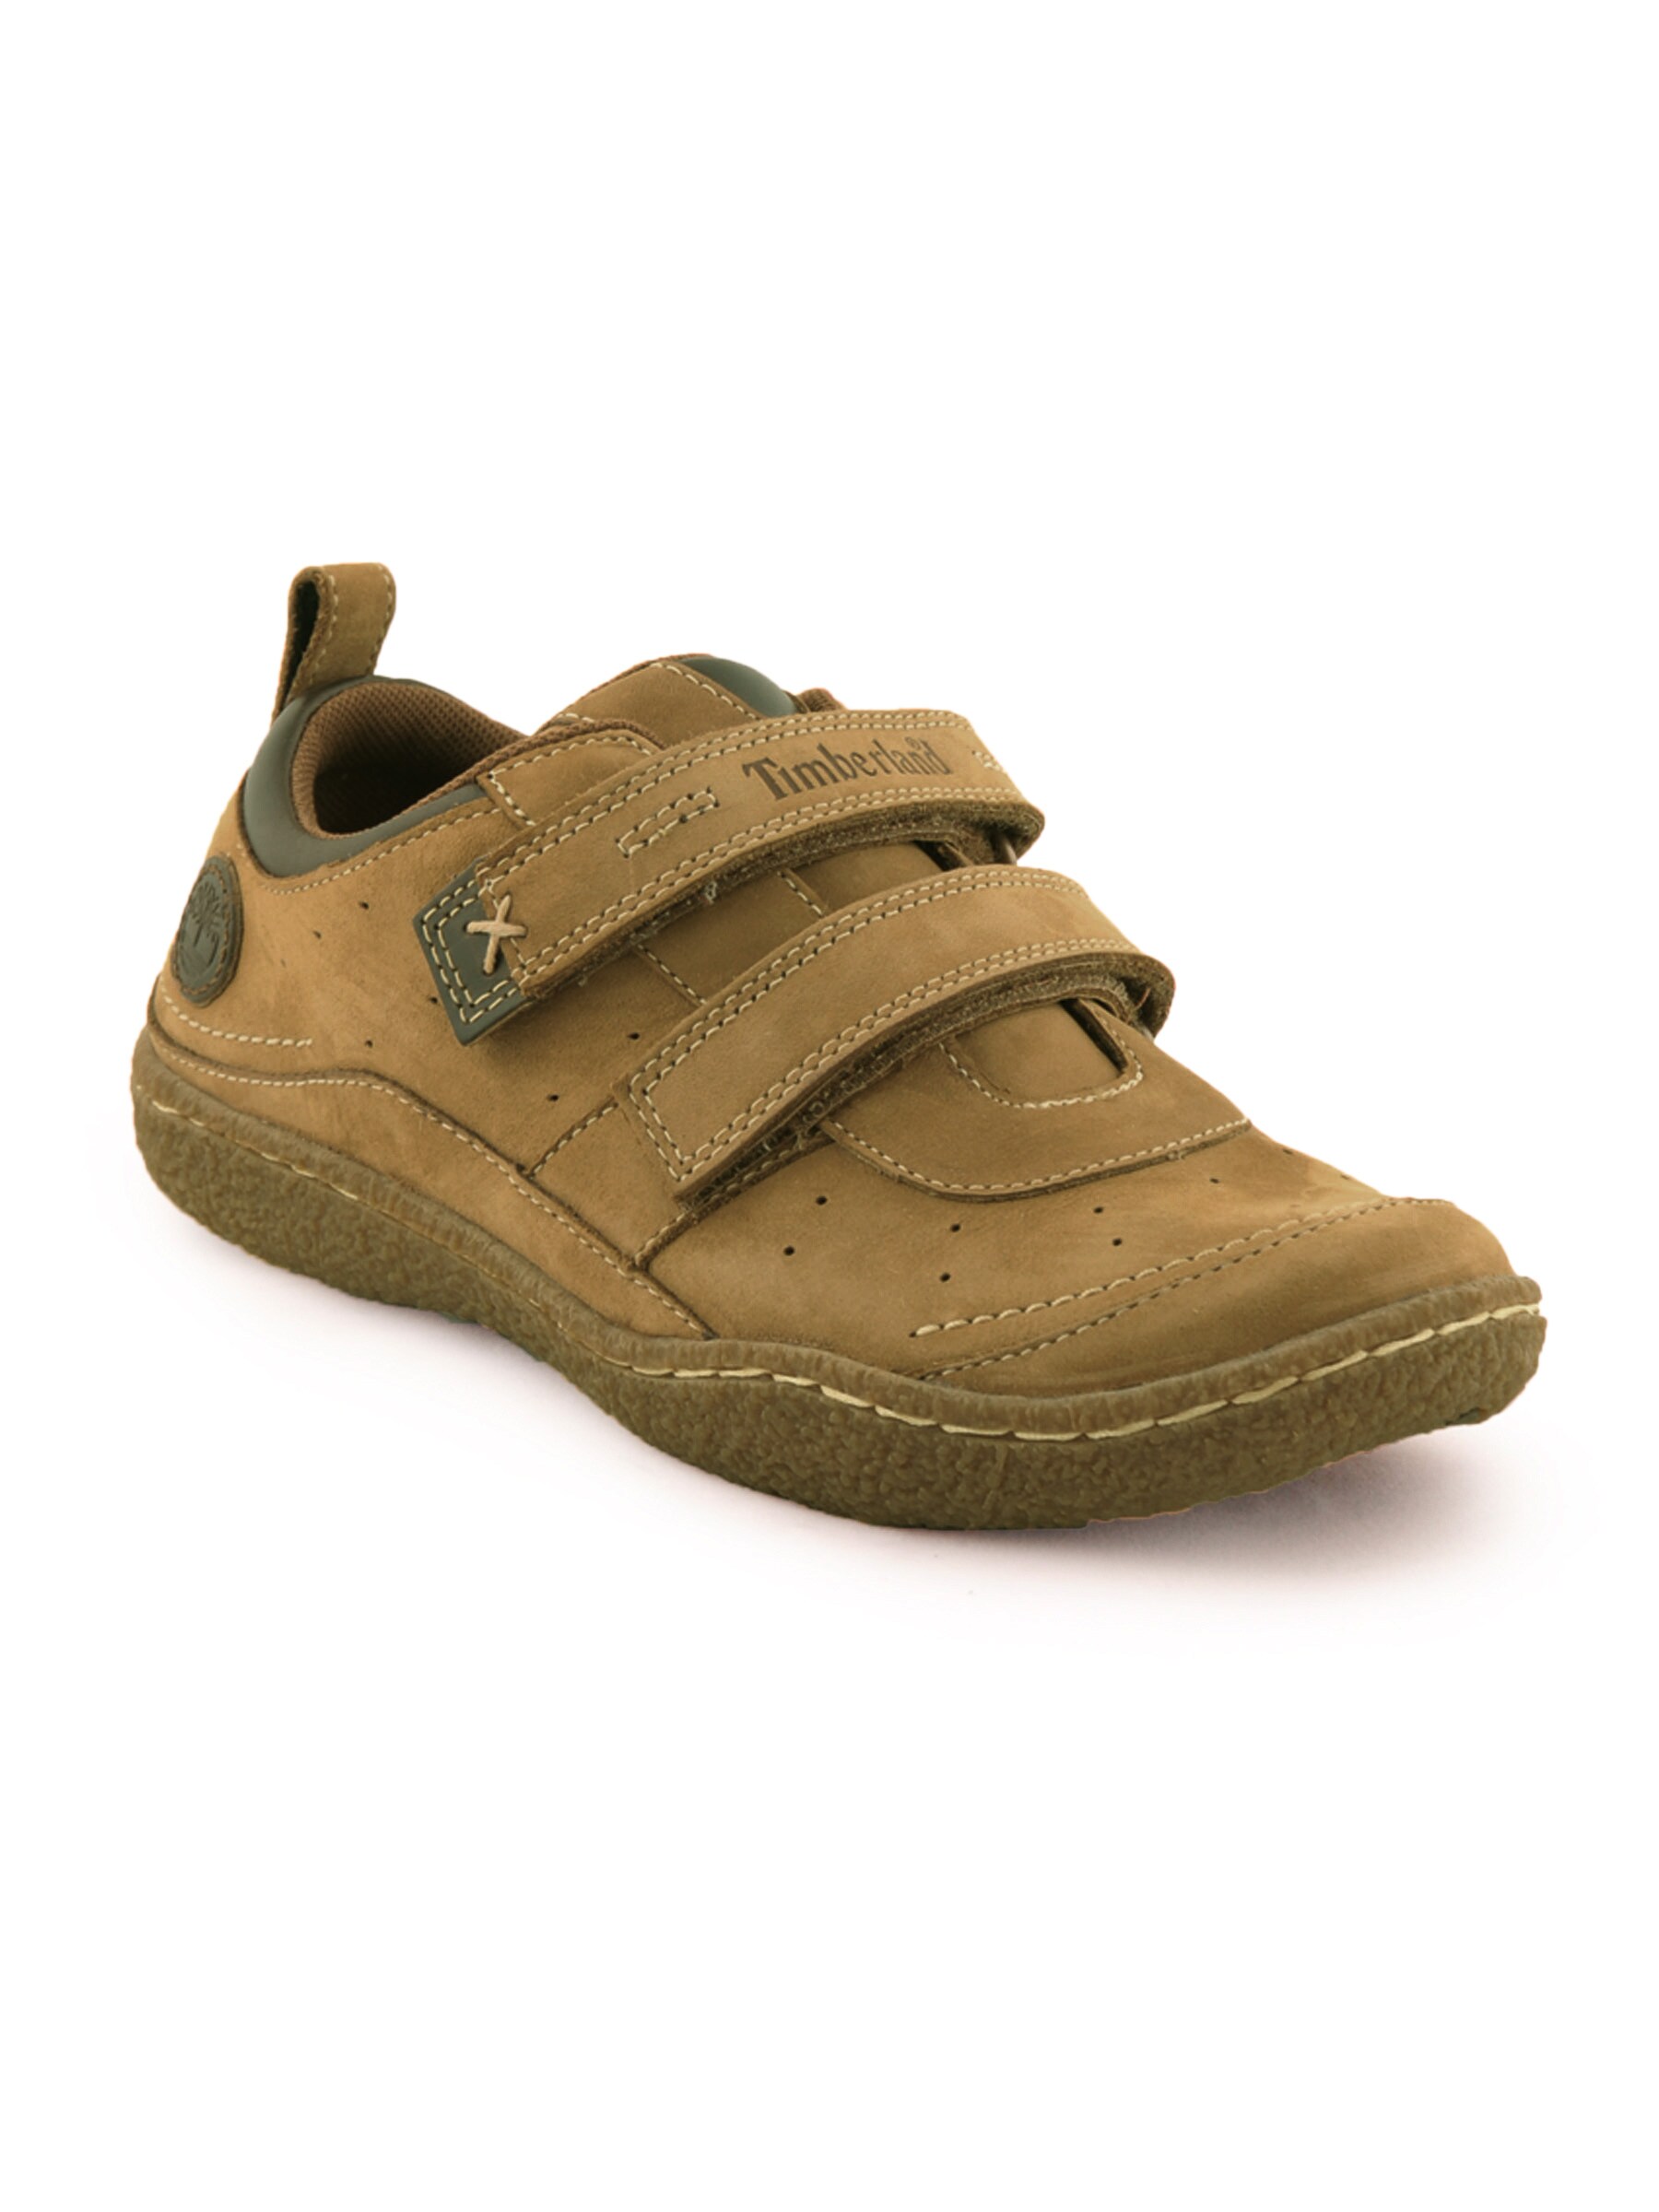 Timberland Kids Boys Brown Casual Shoes